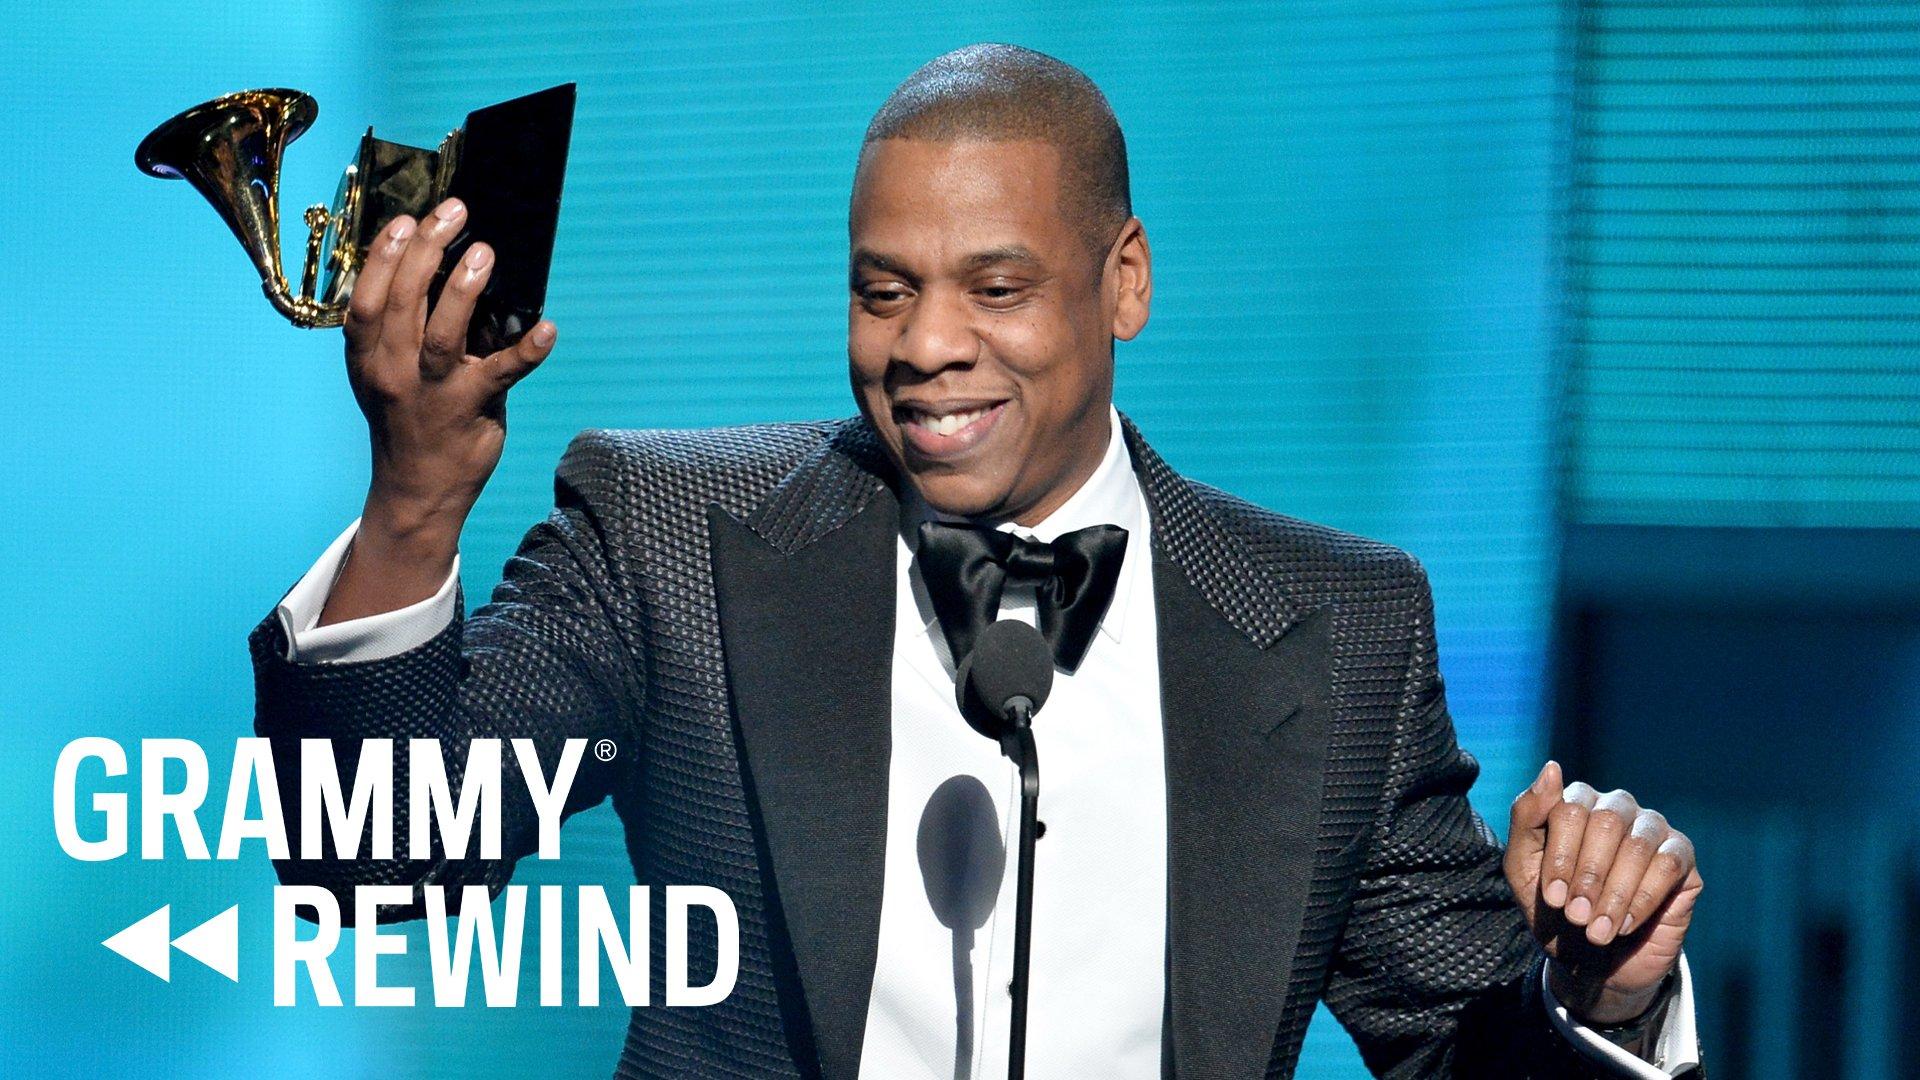 Watch Jay-Z's Sweet Message For Blue Ivy At The 2014 GRAMMYs | GRAMMY Rewind